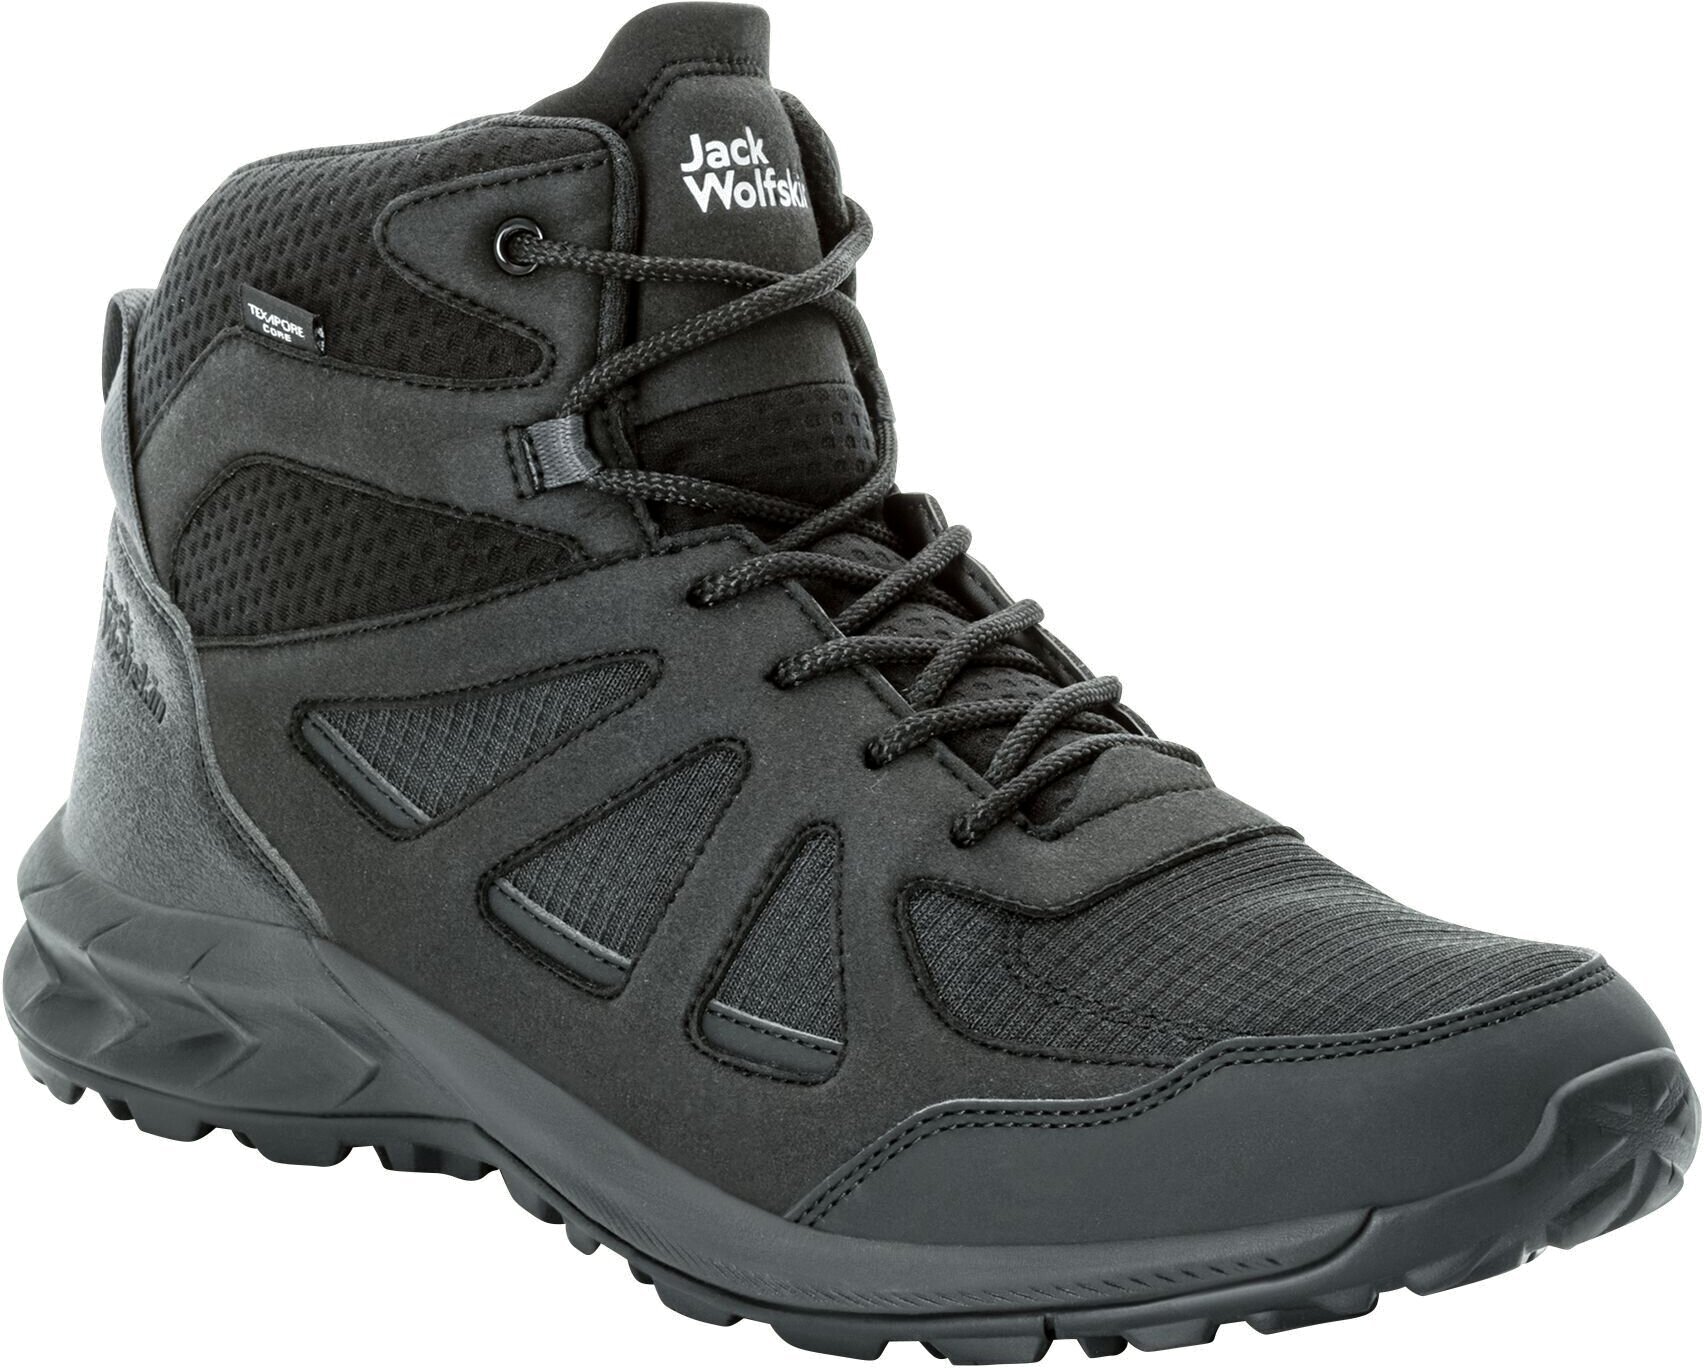 Mens Outdoor Shoes Jack Wolfskin Woodland 2 Texapore Mid M Black 42,5 Mens Outdoor Shoes